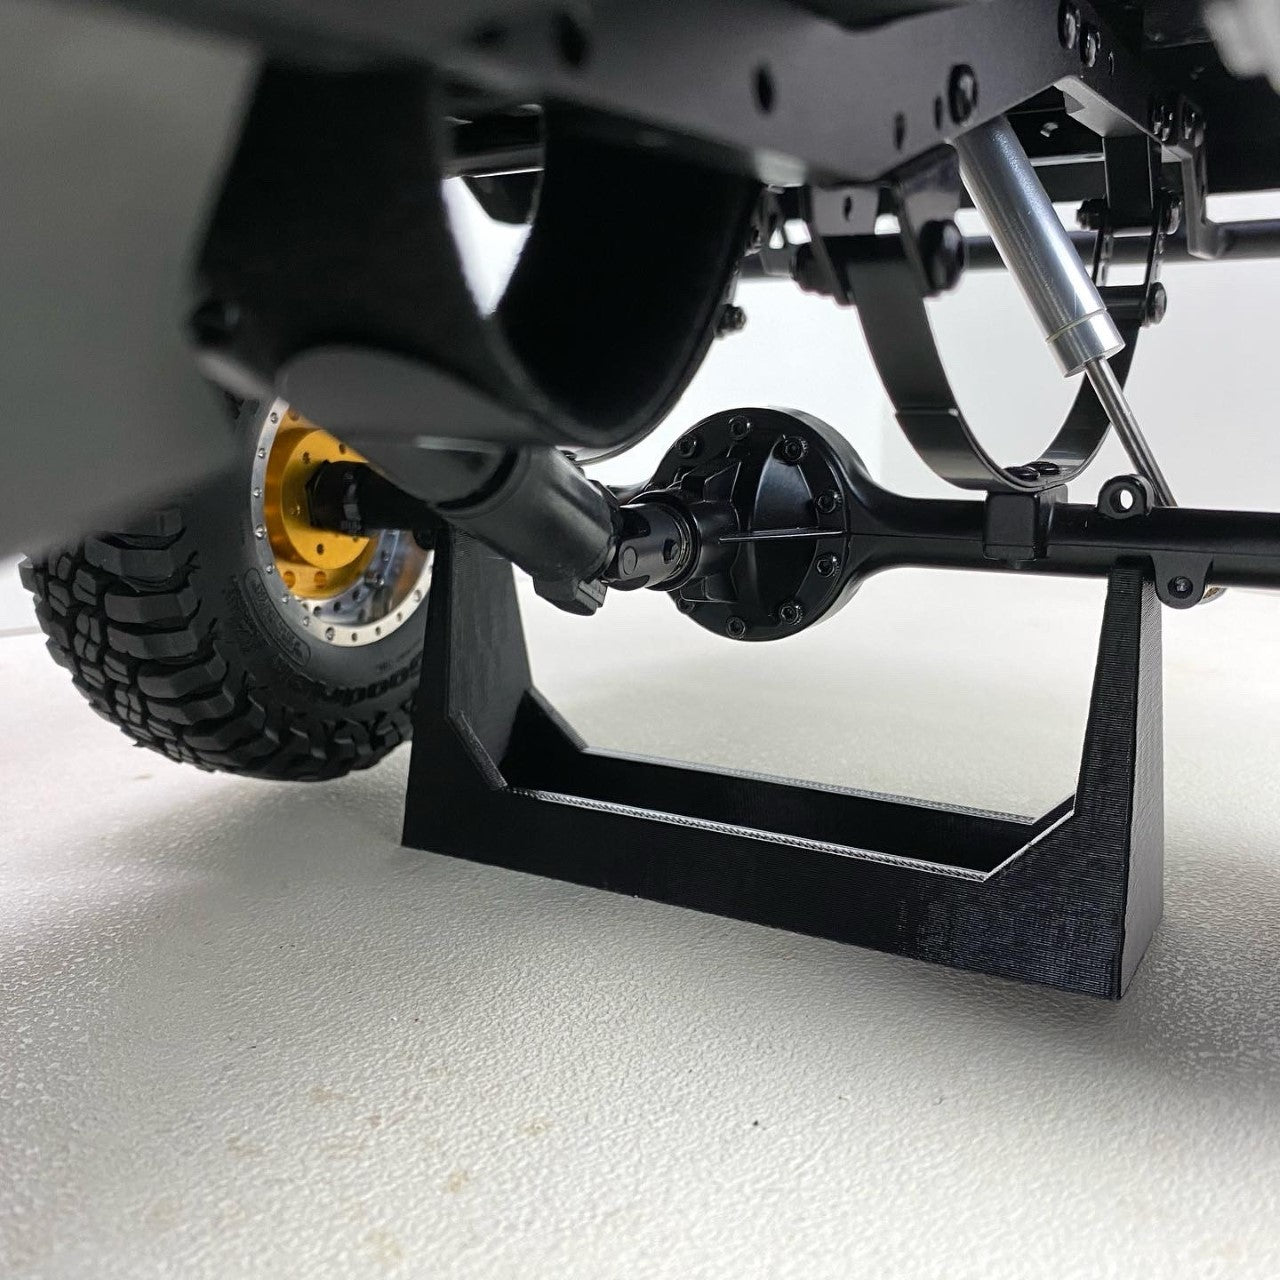 1/10 Scale RC Truck Display Stands